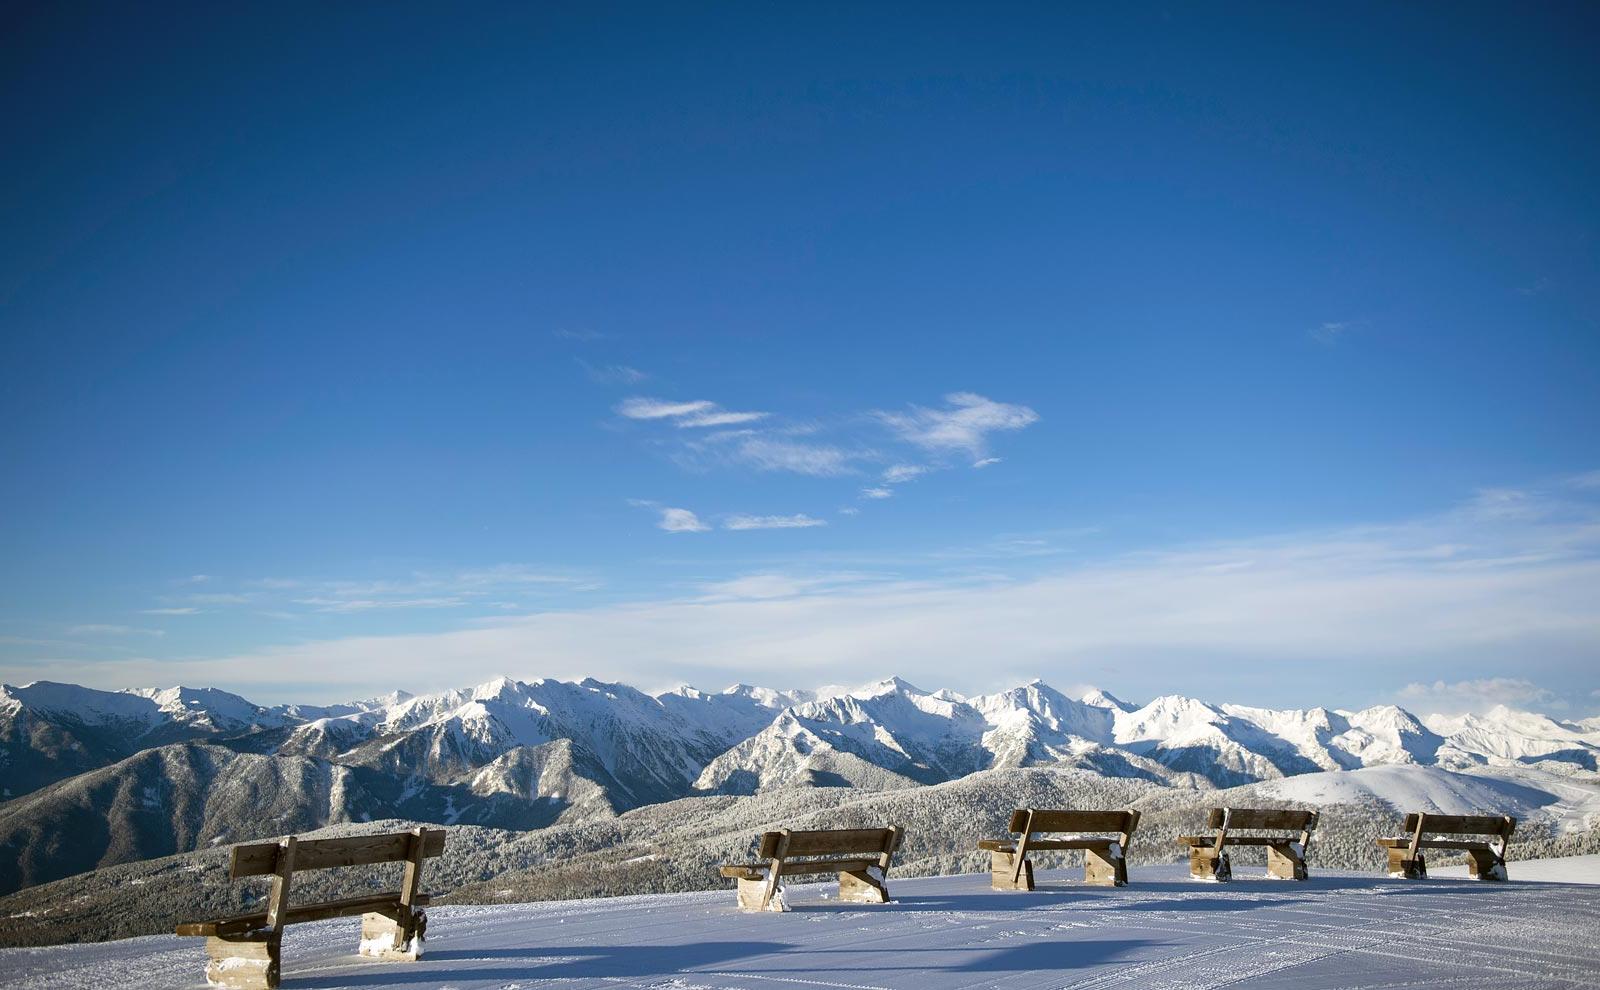 Winter holiday for families in South Tyrol